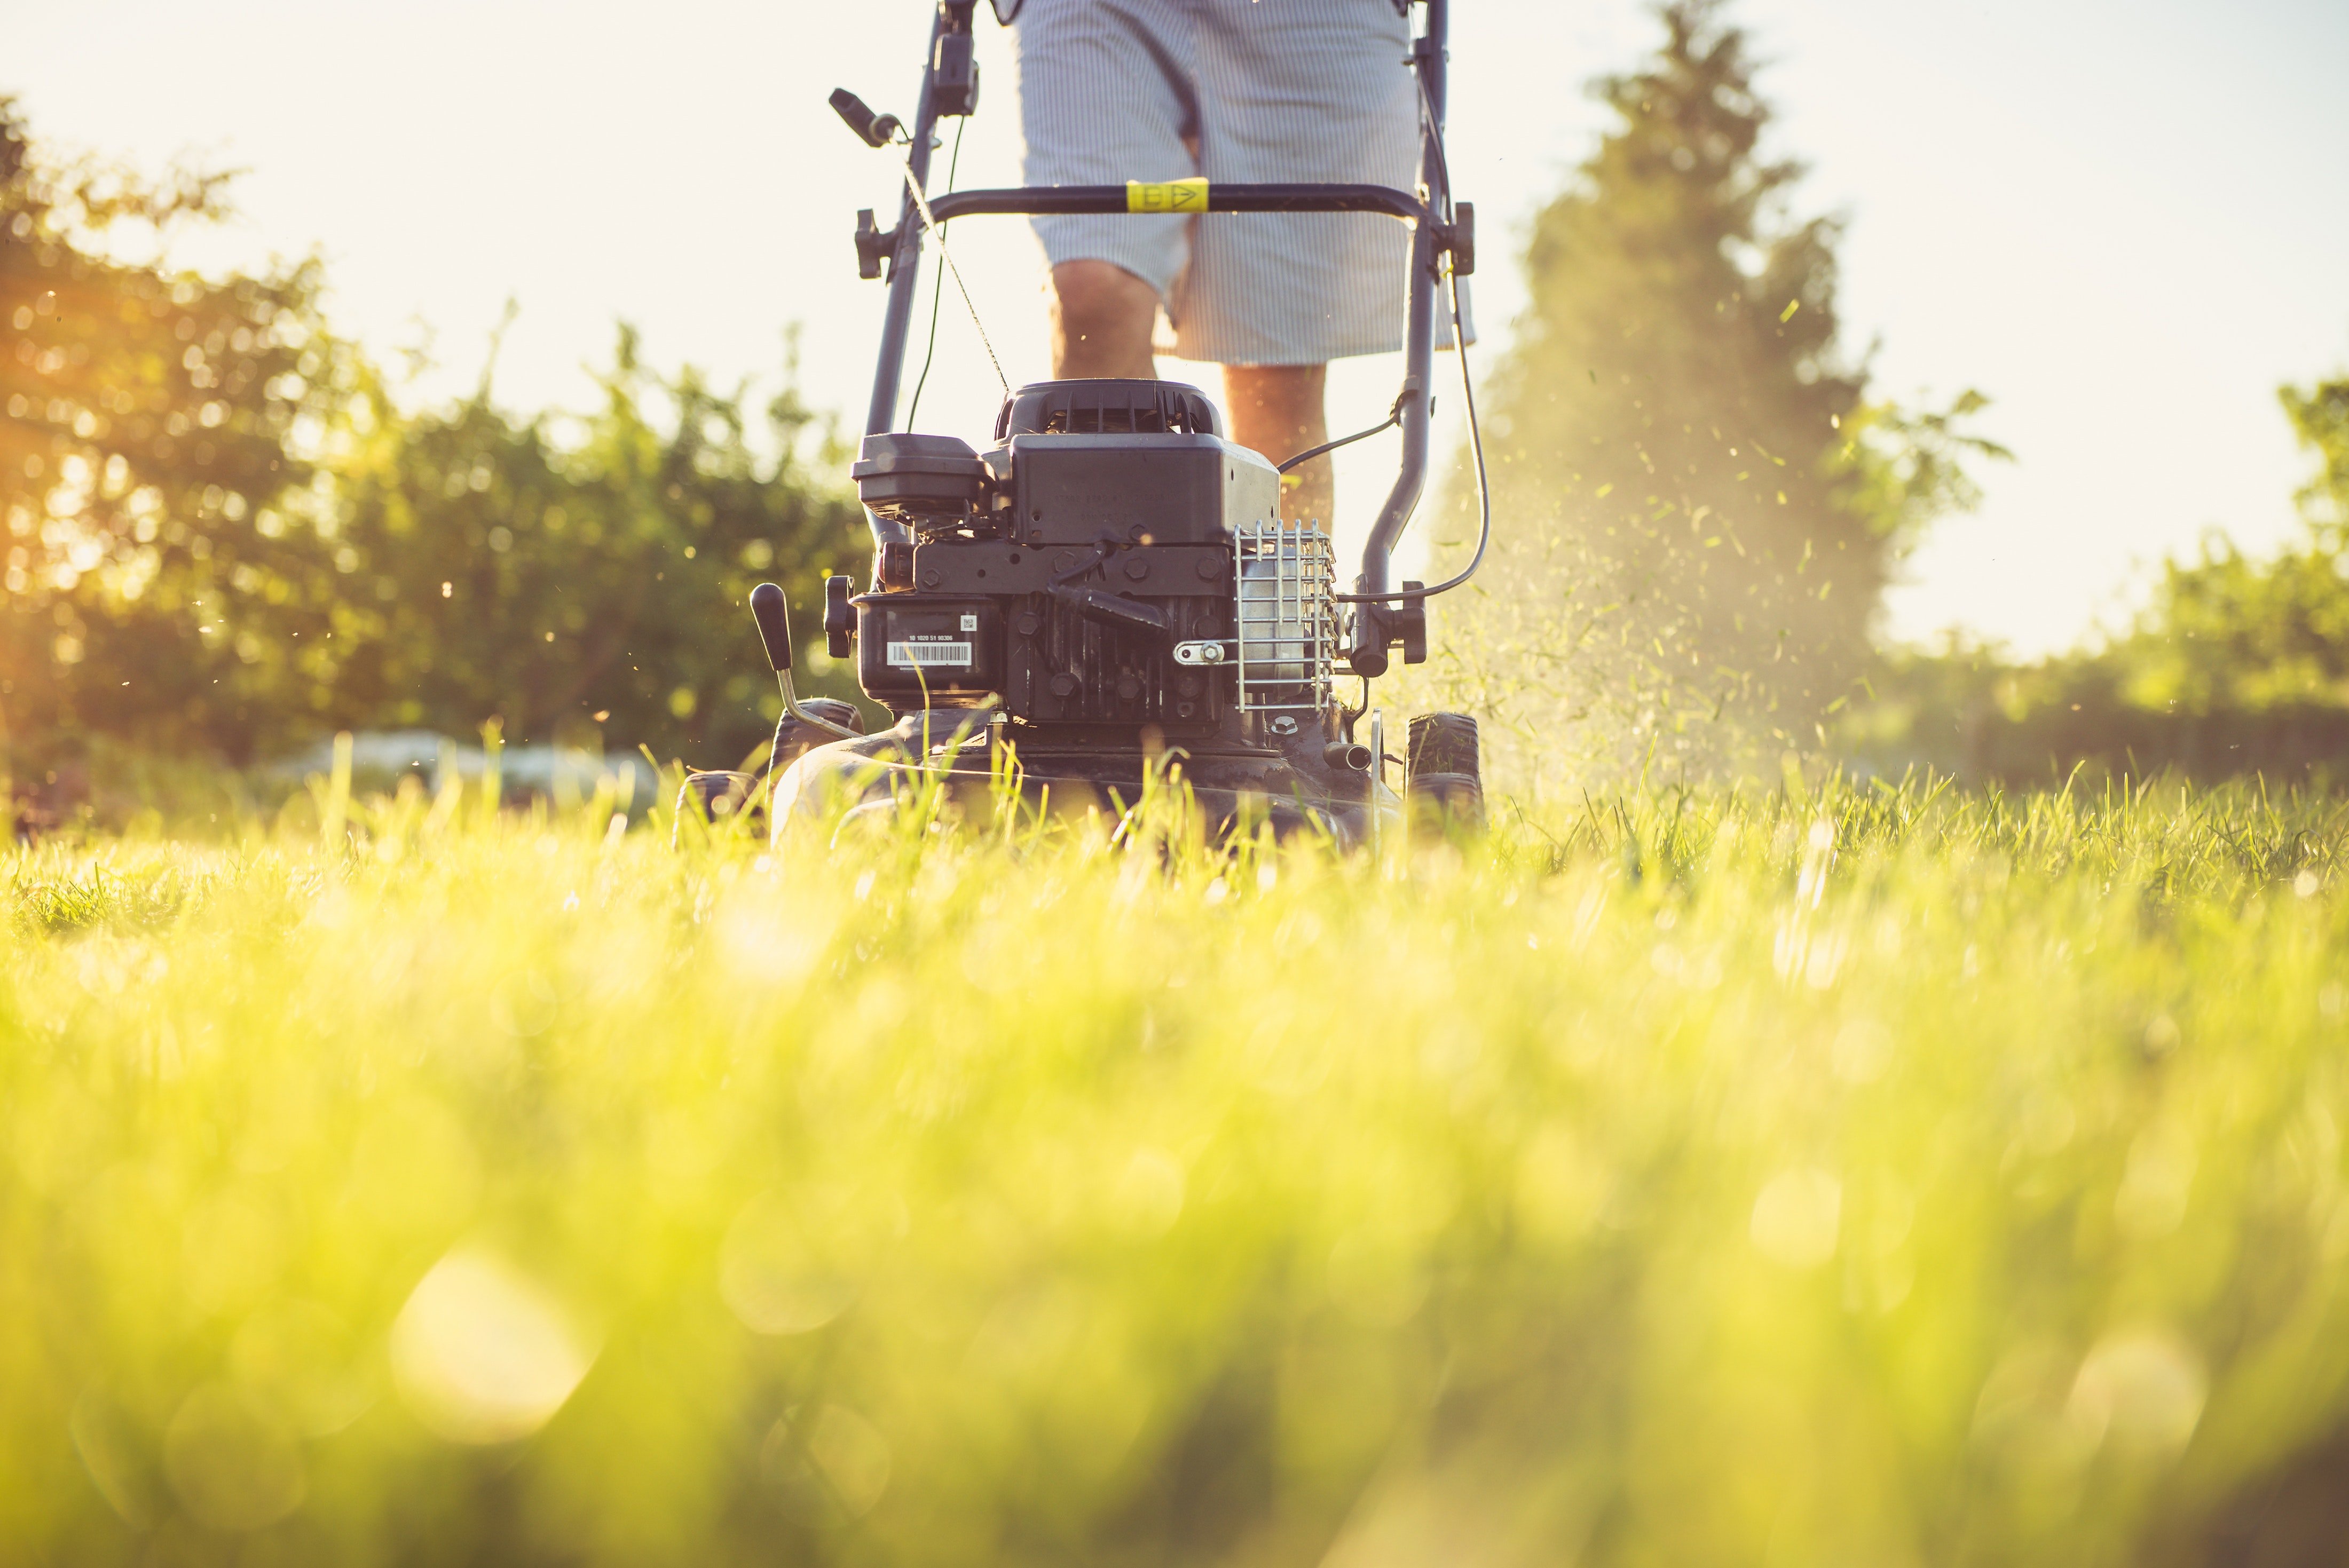 The neighbors wanted Gina to mow her lawn. | Source: Pexels